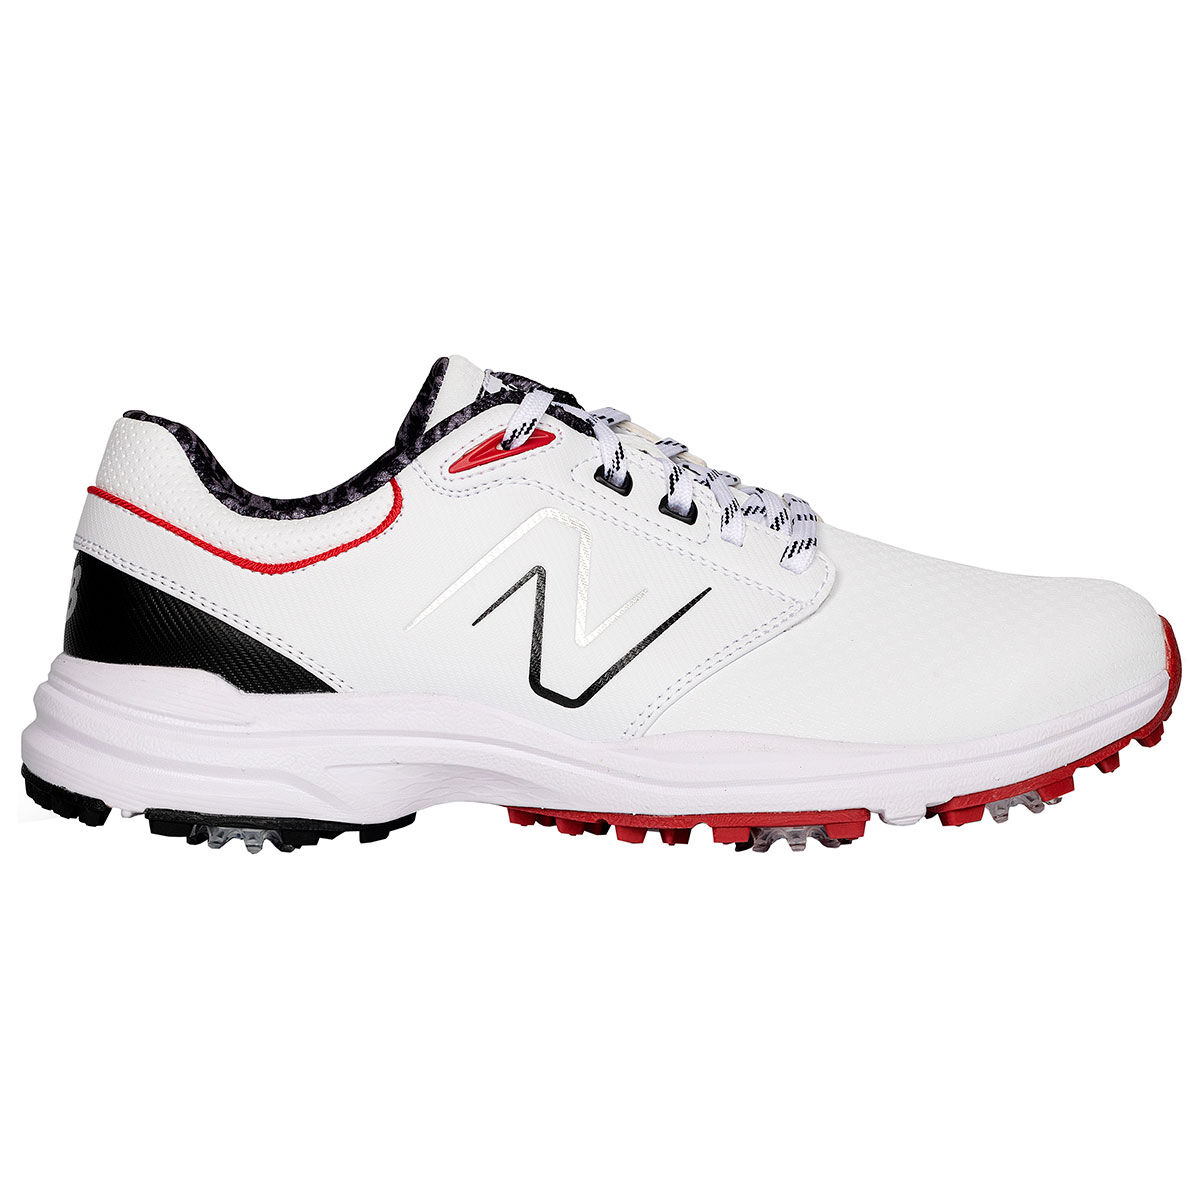 New Balance Men’s Brighton Waterproof Spiked Golf Shoes, Mens, White/red, 11 | American Golf